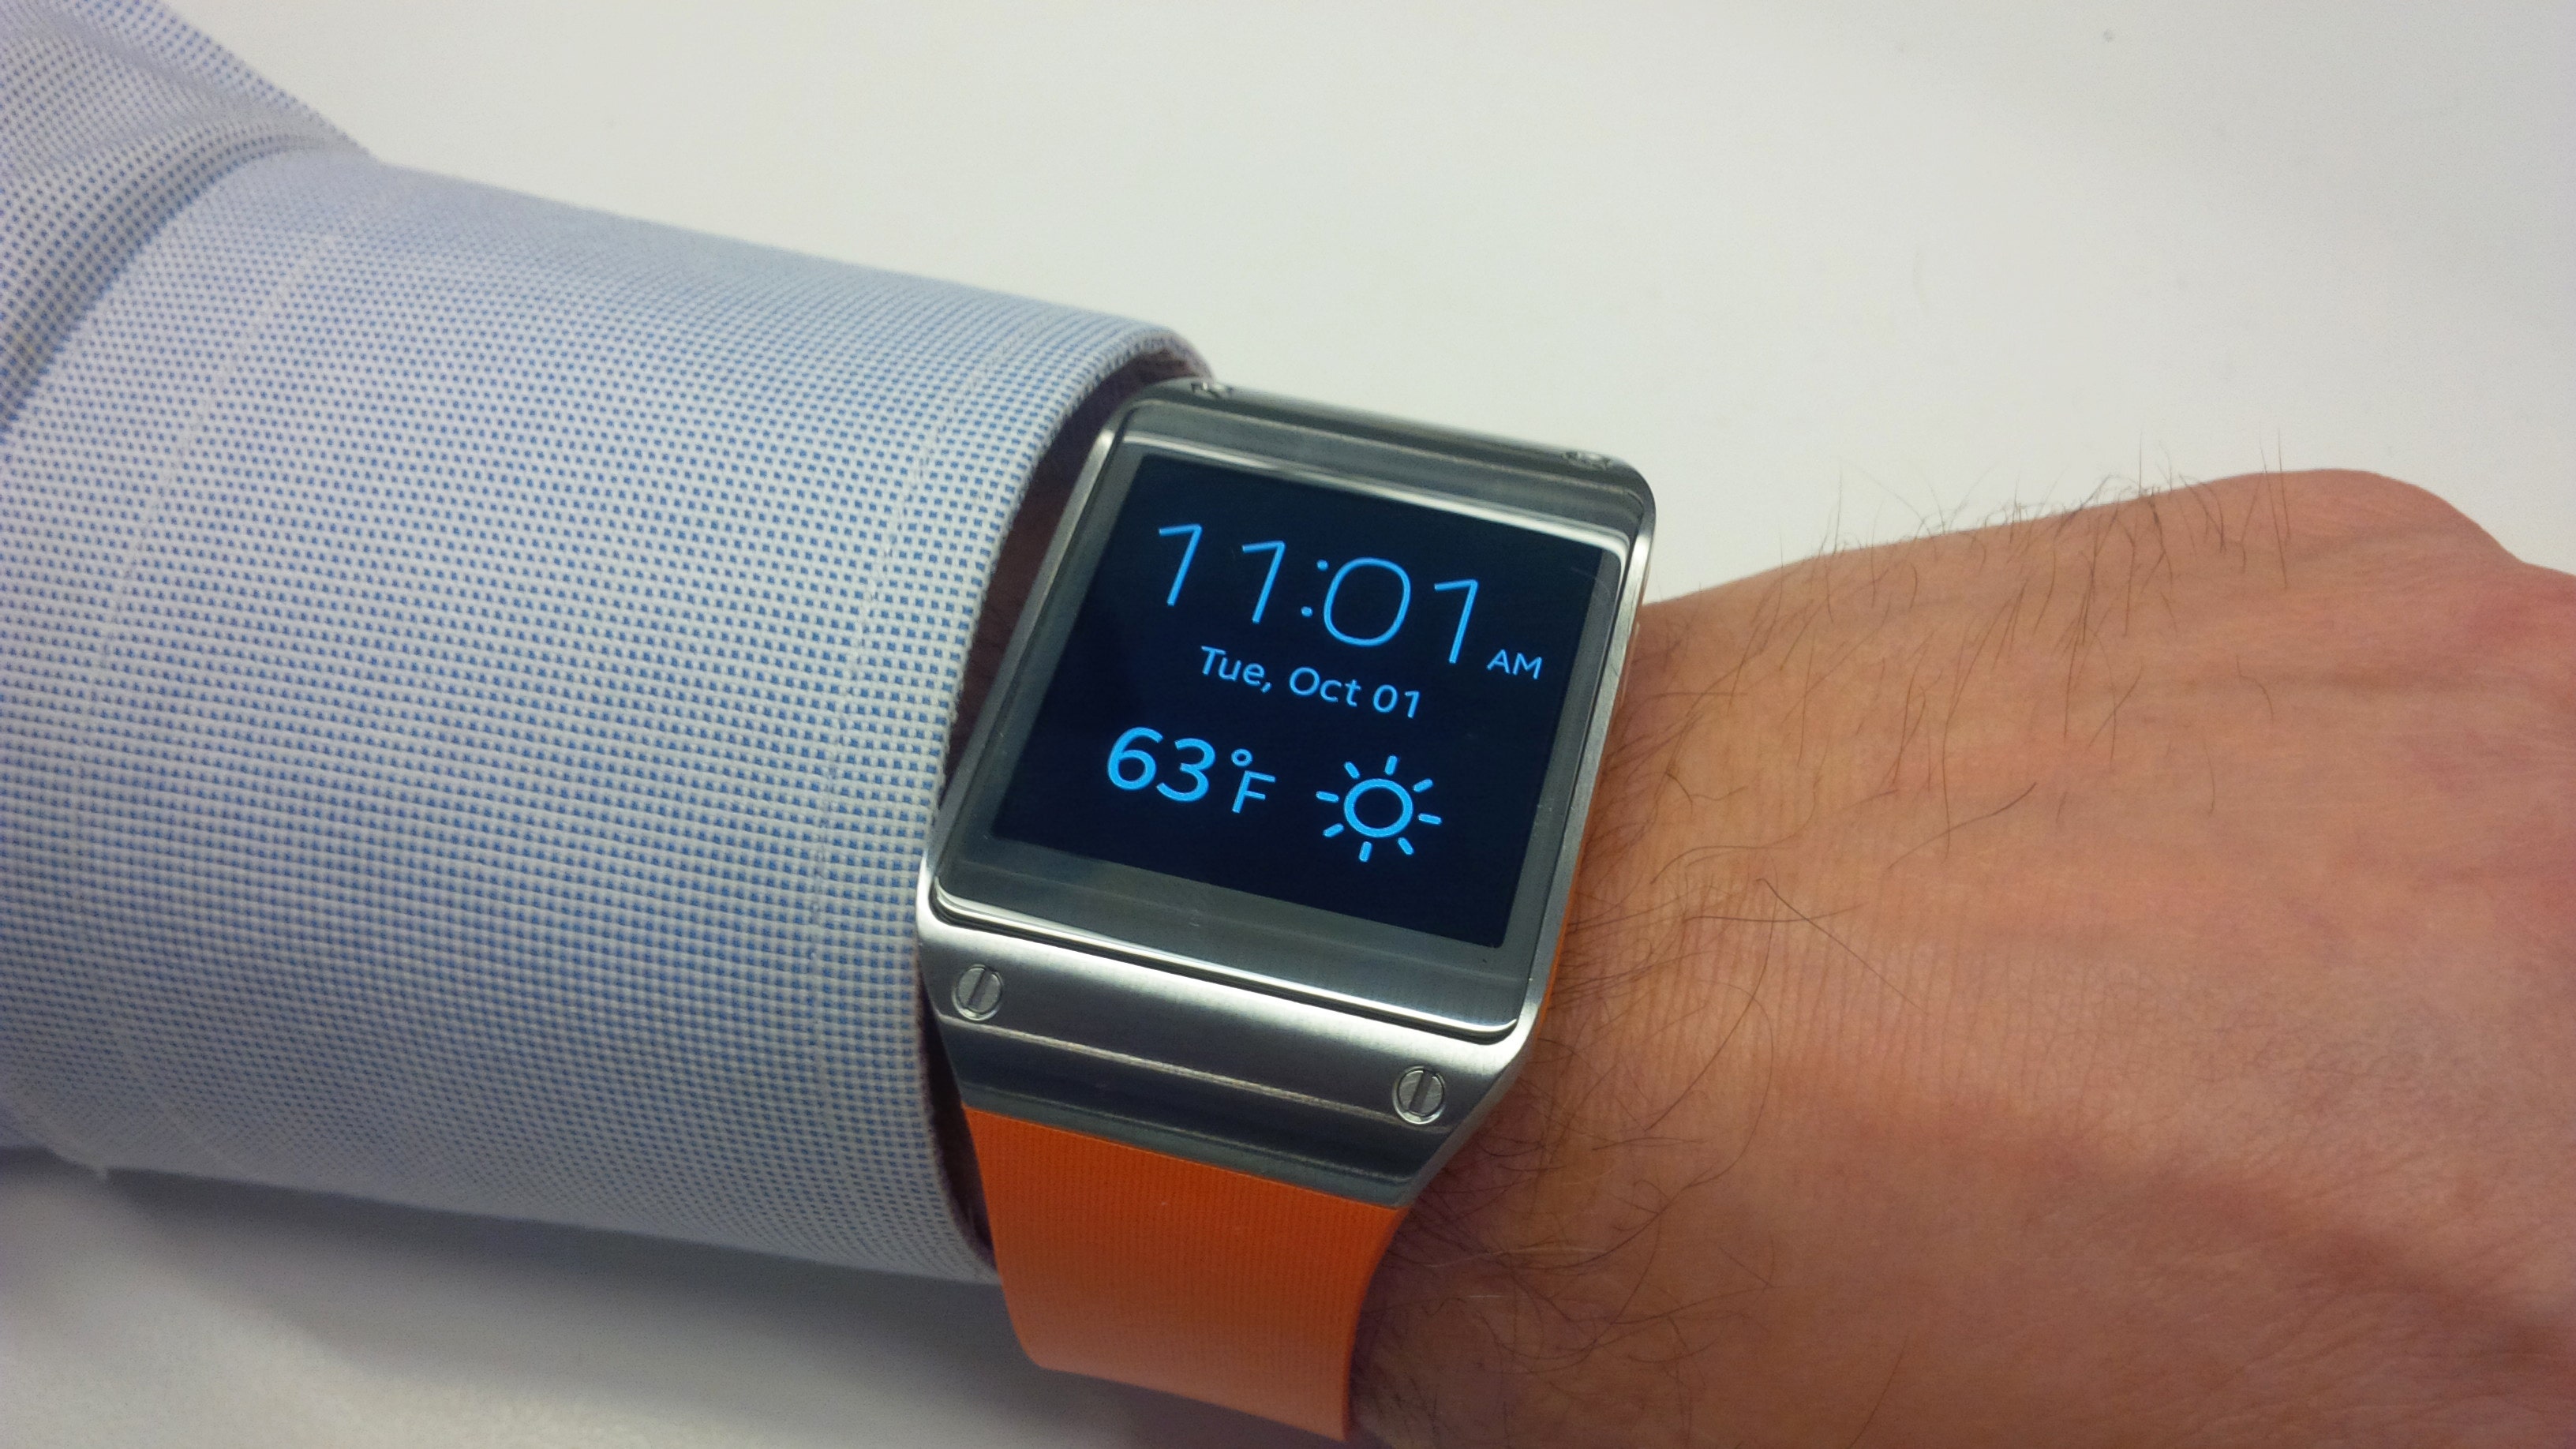 Samsung Gear S review: The smartwatch that's also a smartphone - CNET